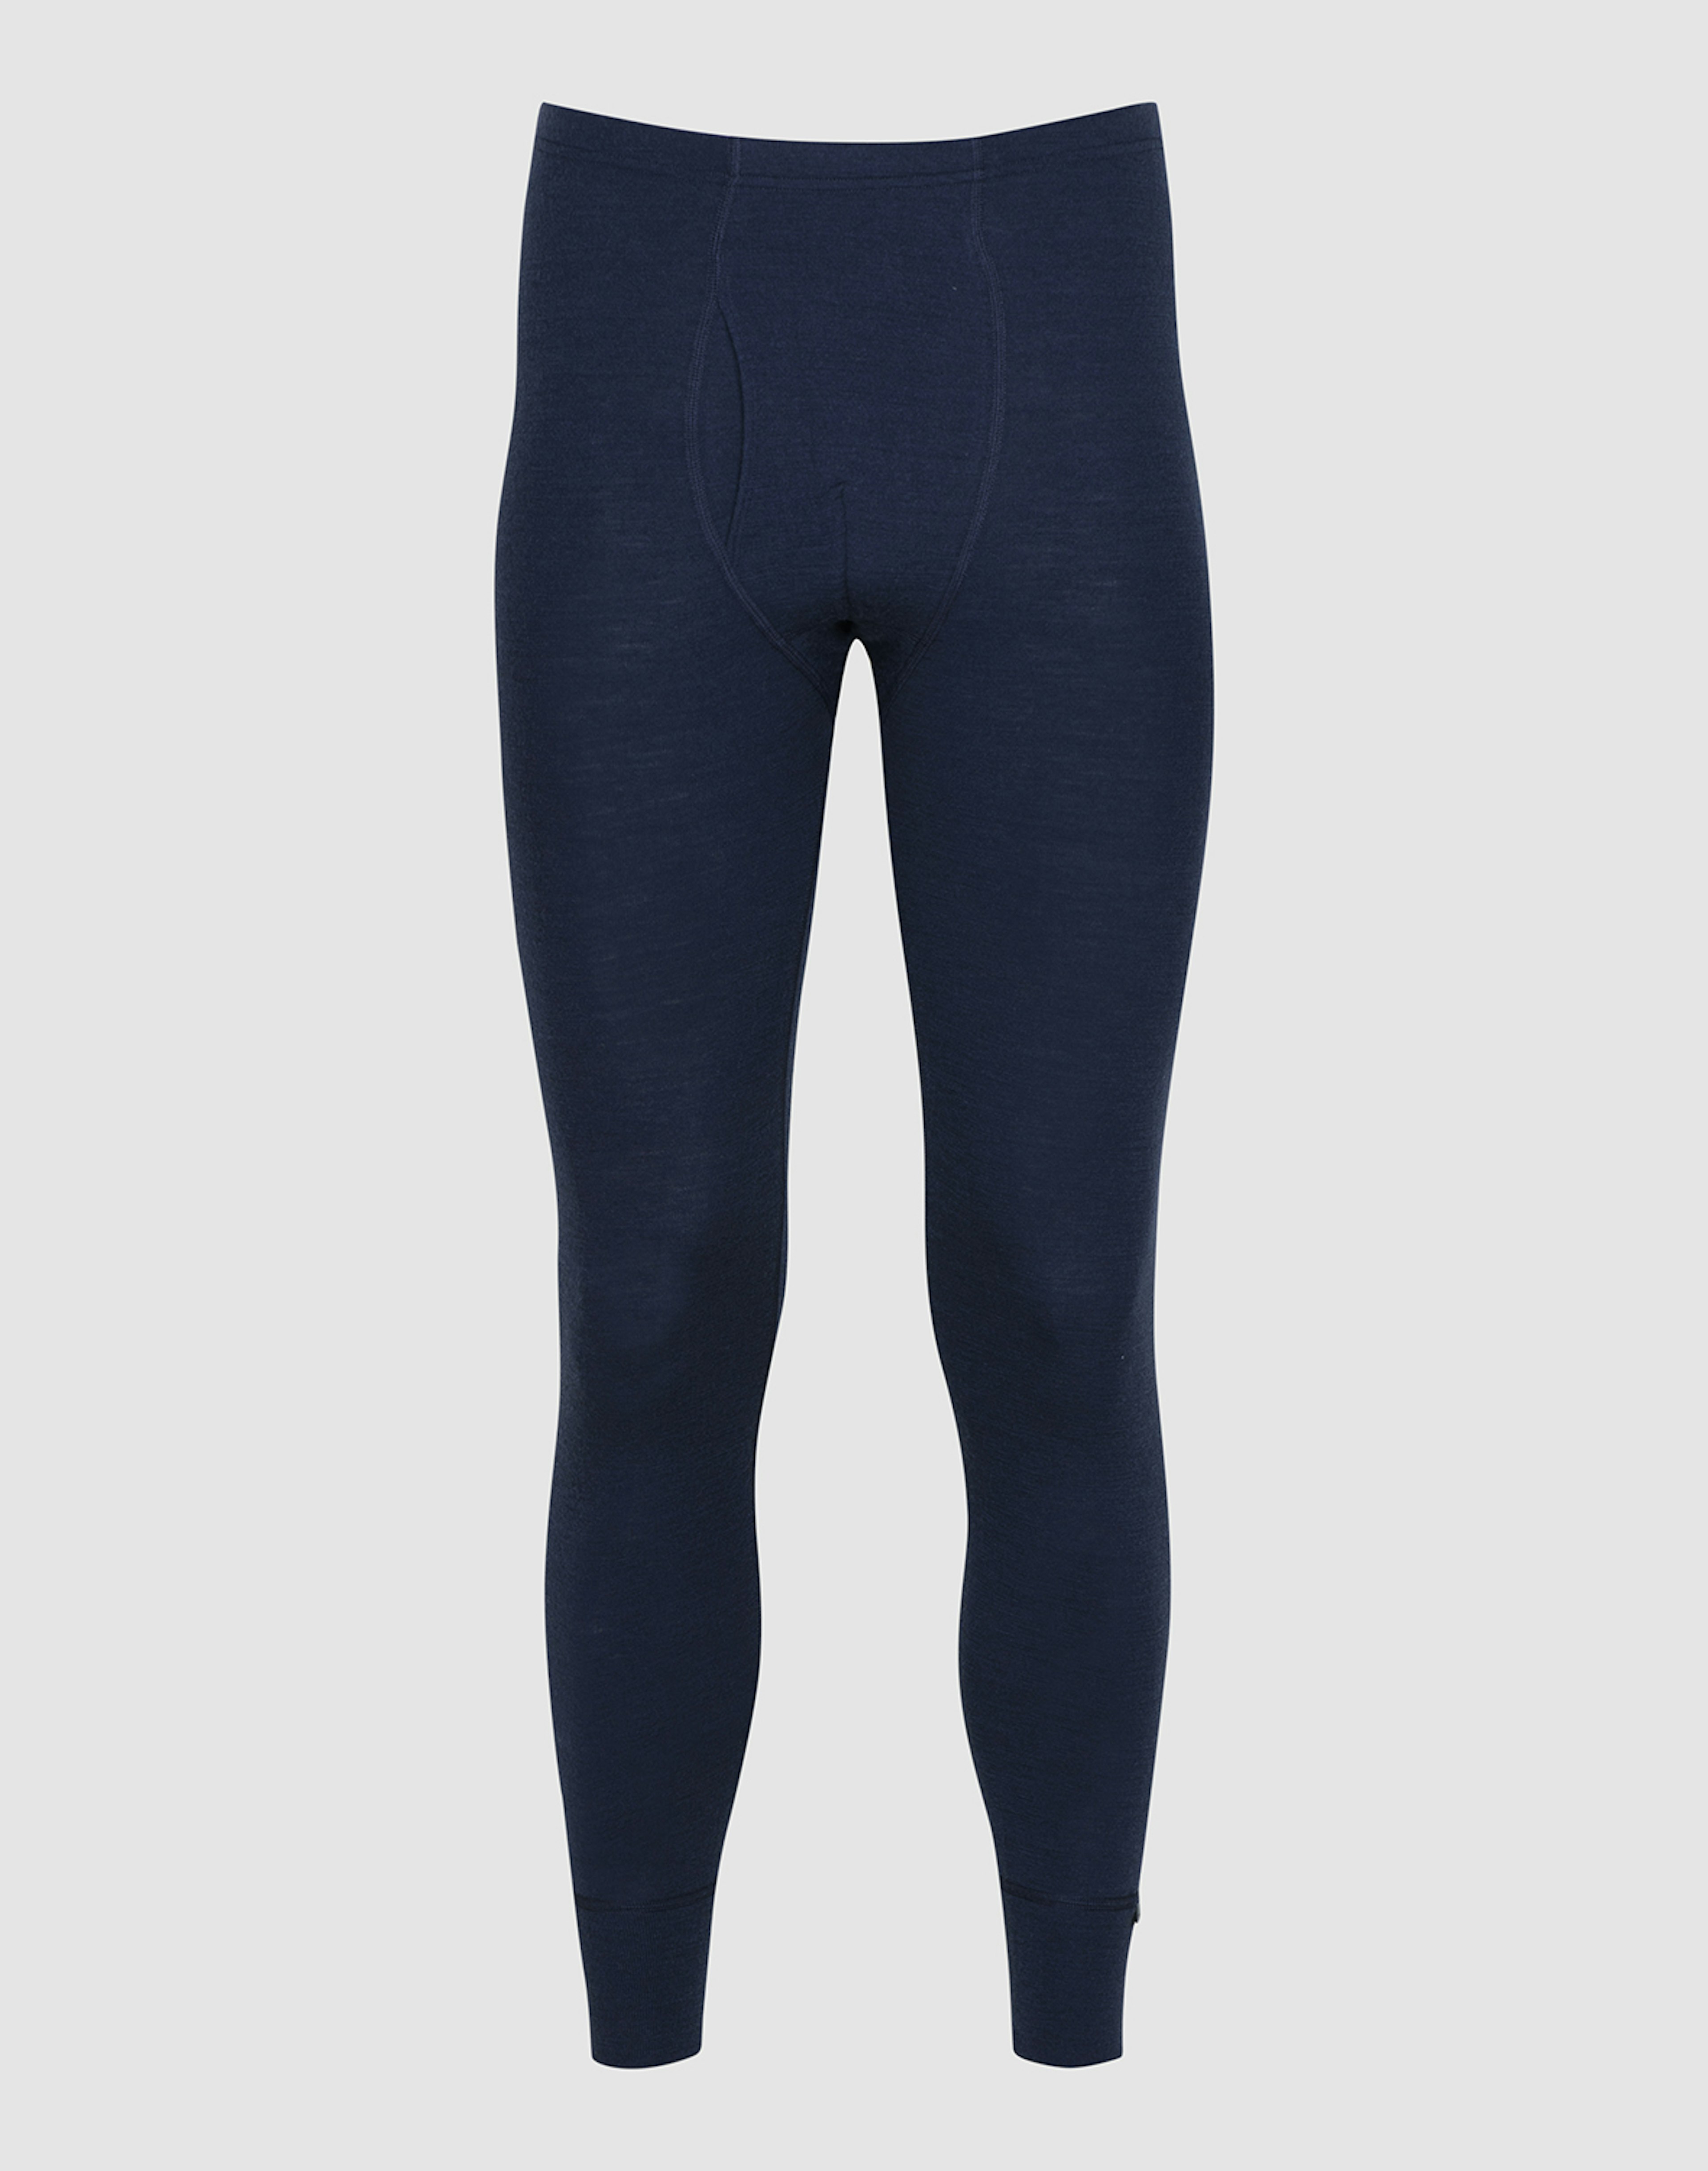 Men's merino wool long johns with fly Navy blue